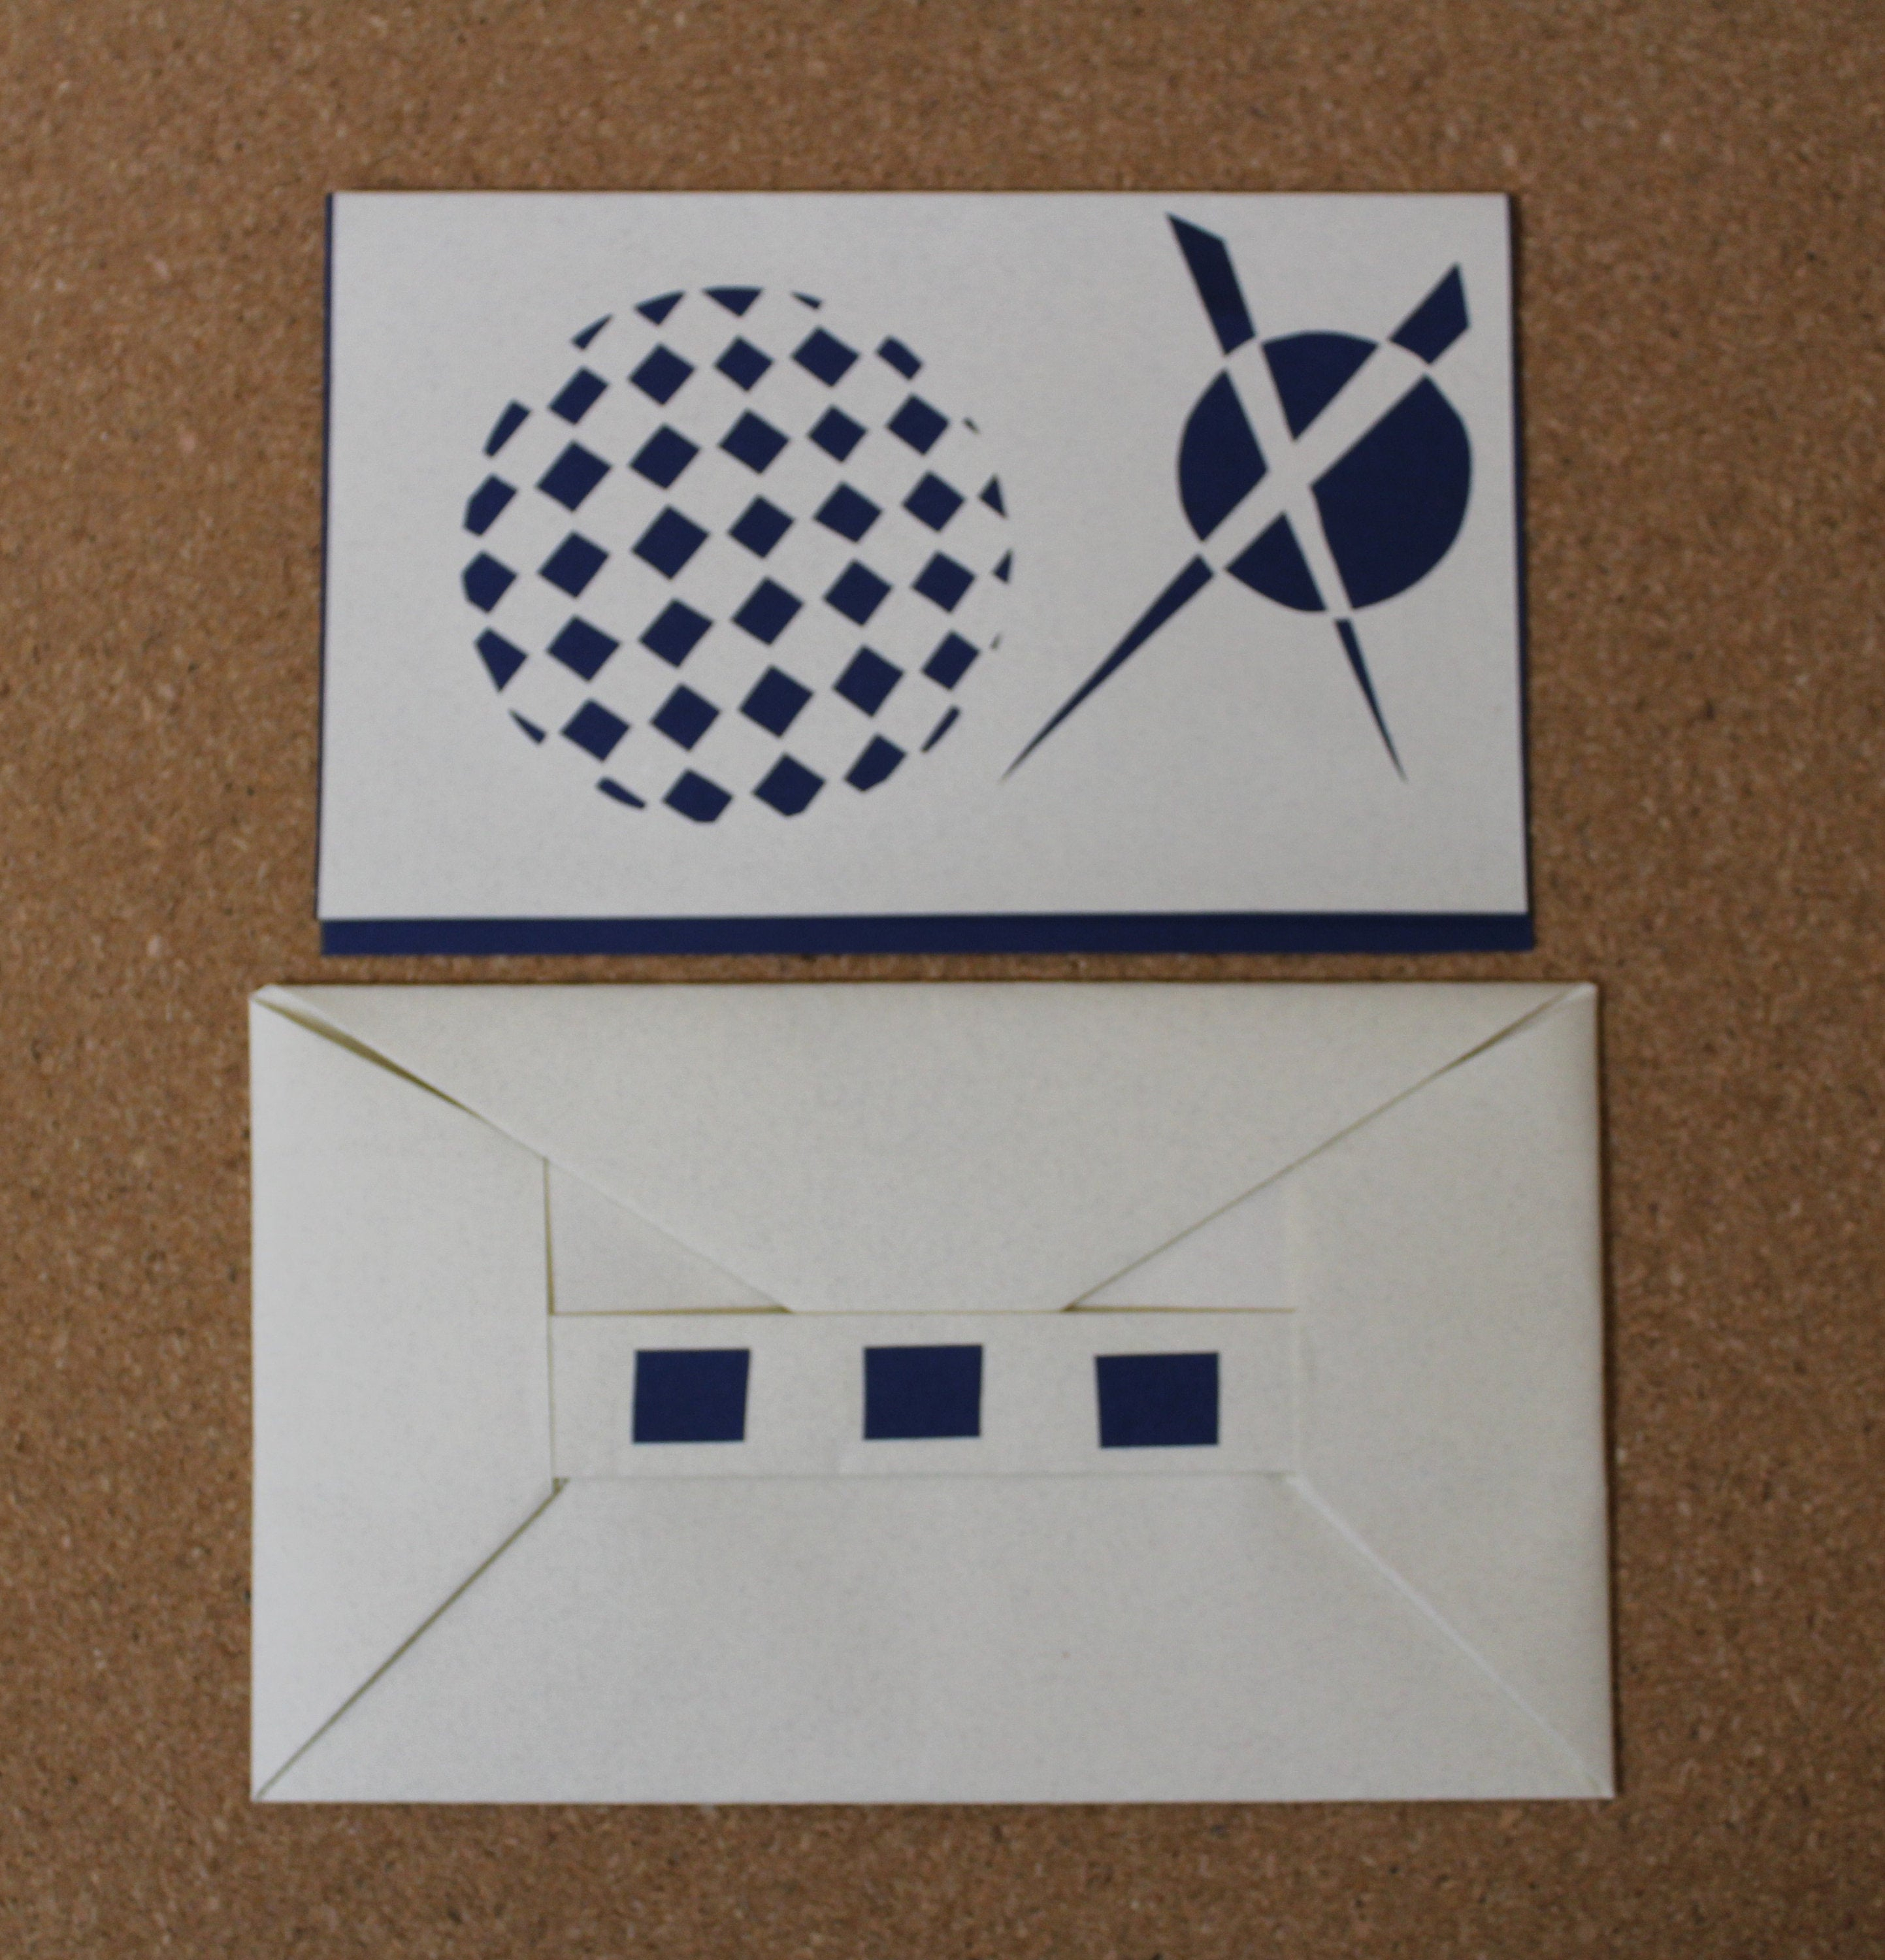 Origami Bar Envelope Instructions Origami Envelope Greeing Card Origami Gift Card Geometric Blue Red Cards Blank Cards Write Your Message Neat Envelope Cardstock